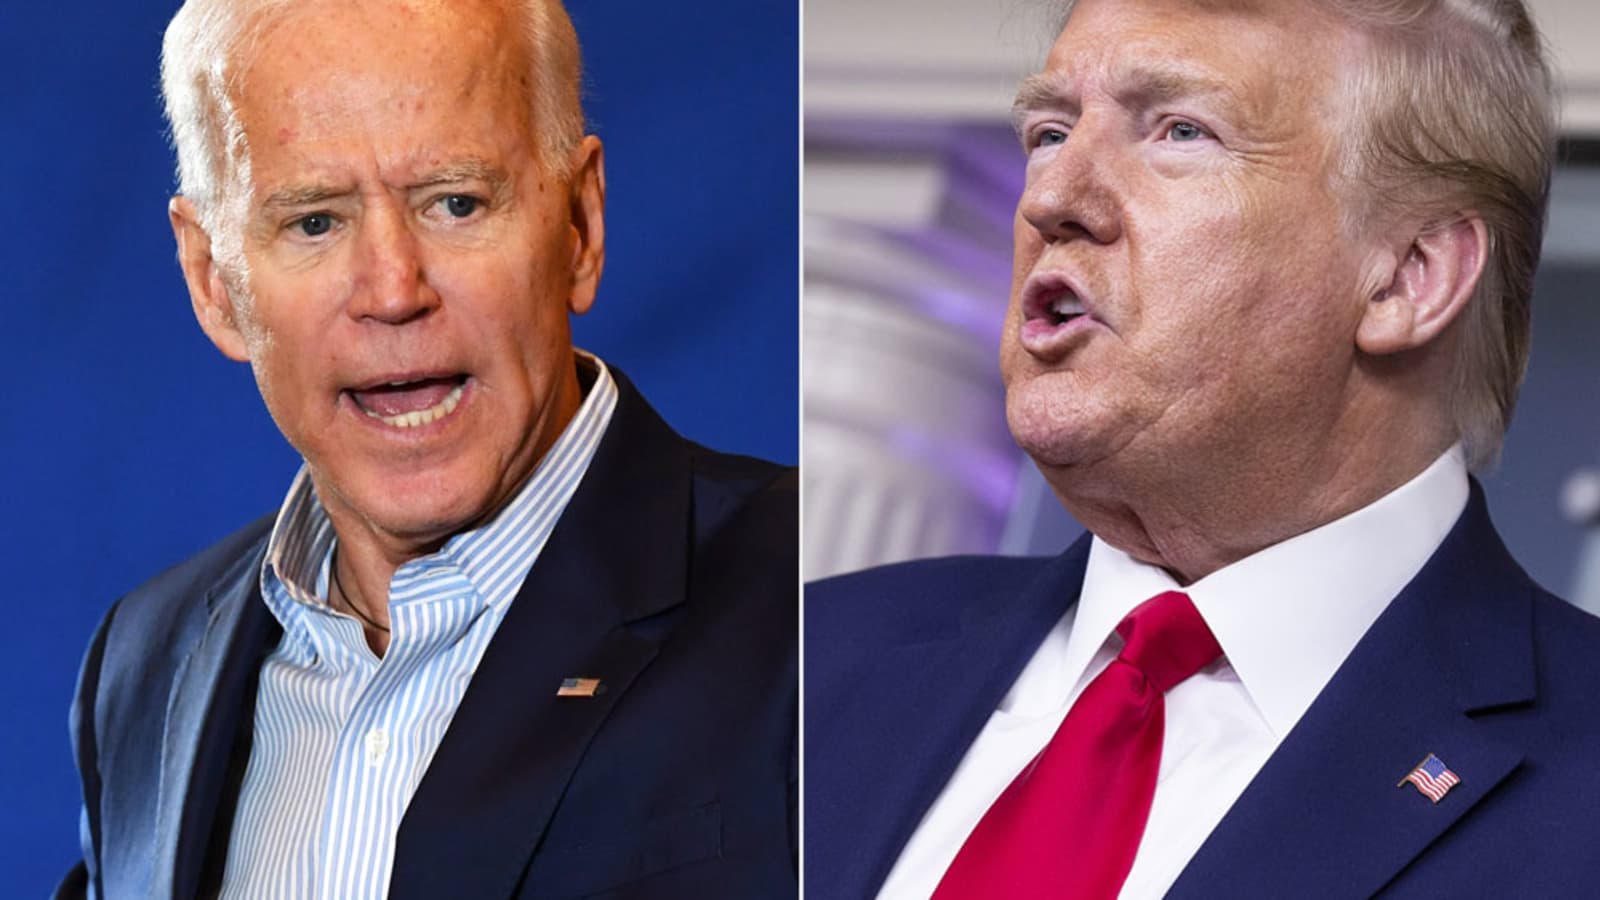 Trump-Biden election: What to watch in the final two weeks